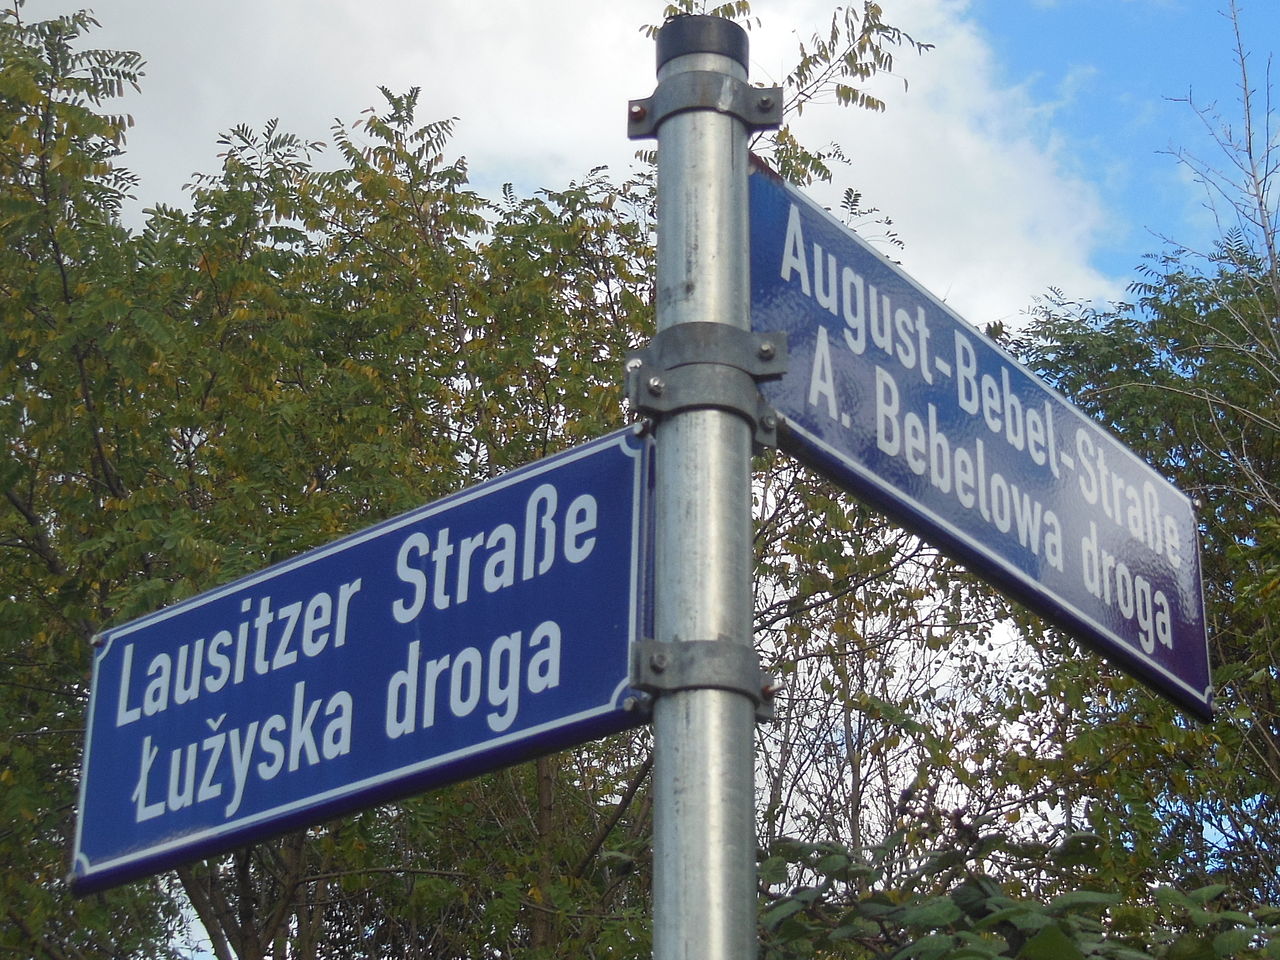 Bilingual road sign in Cottbus, Germany